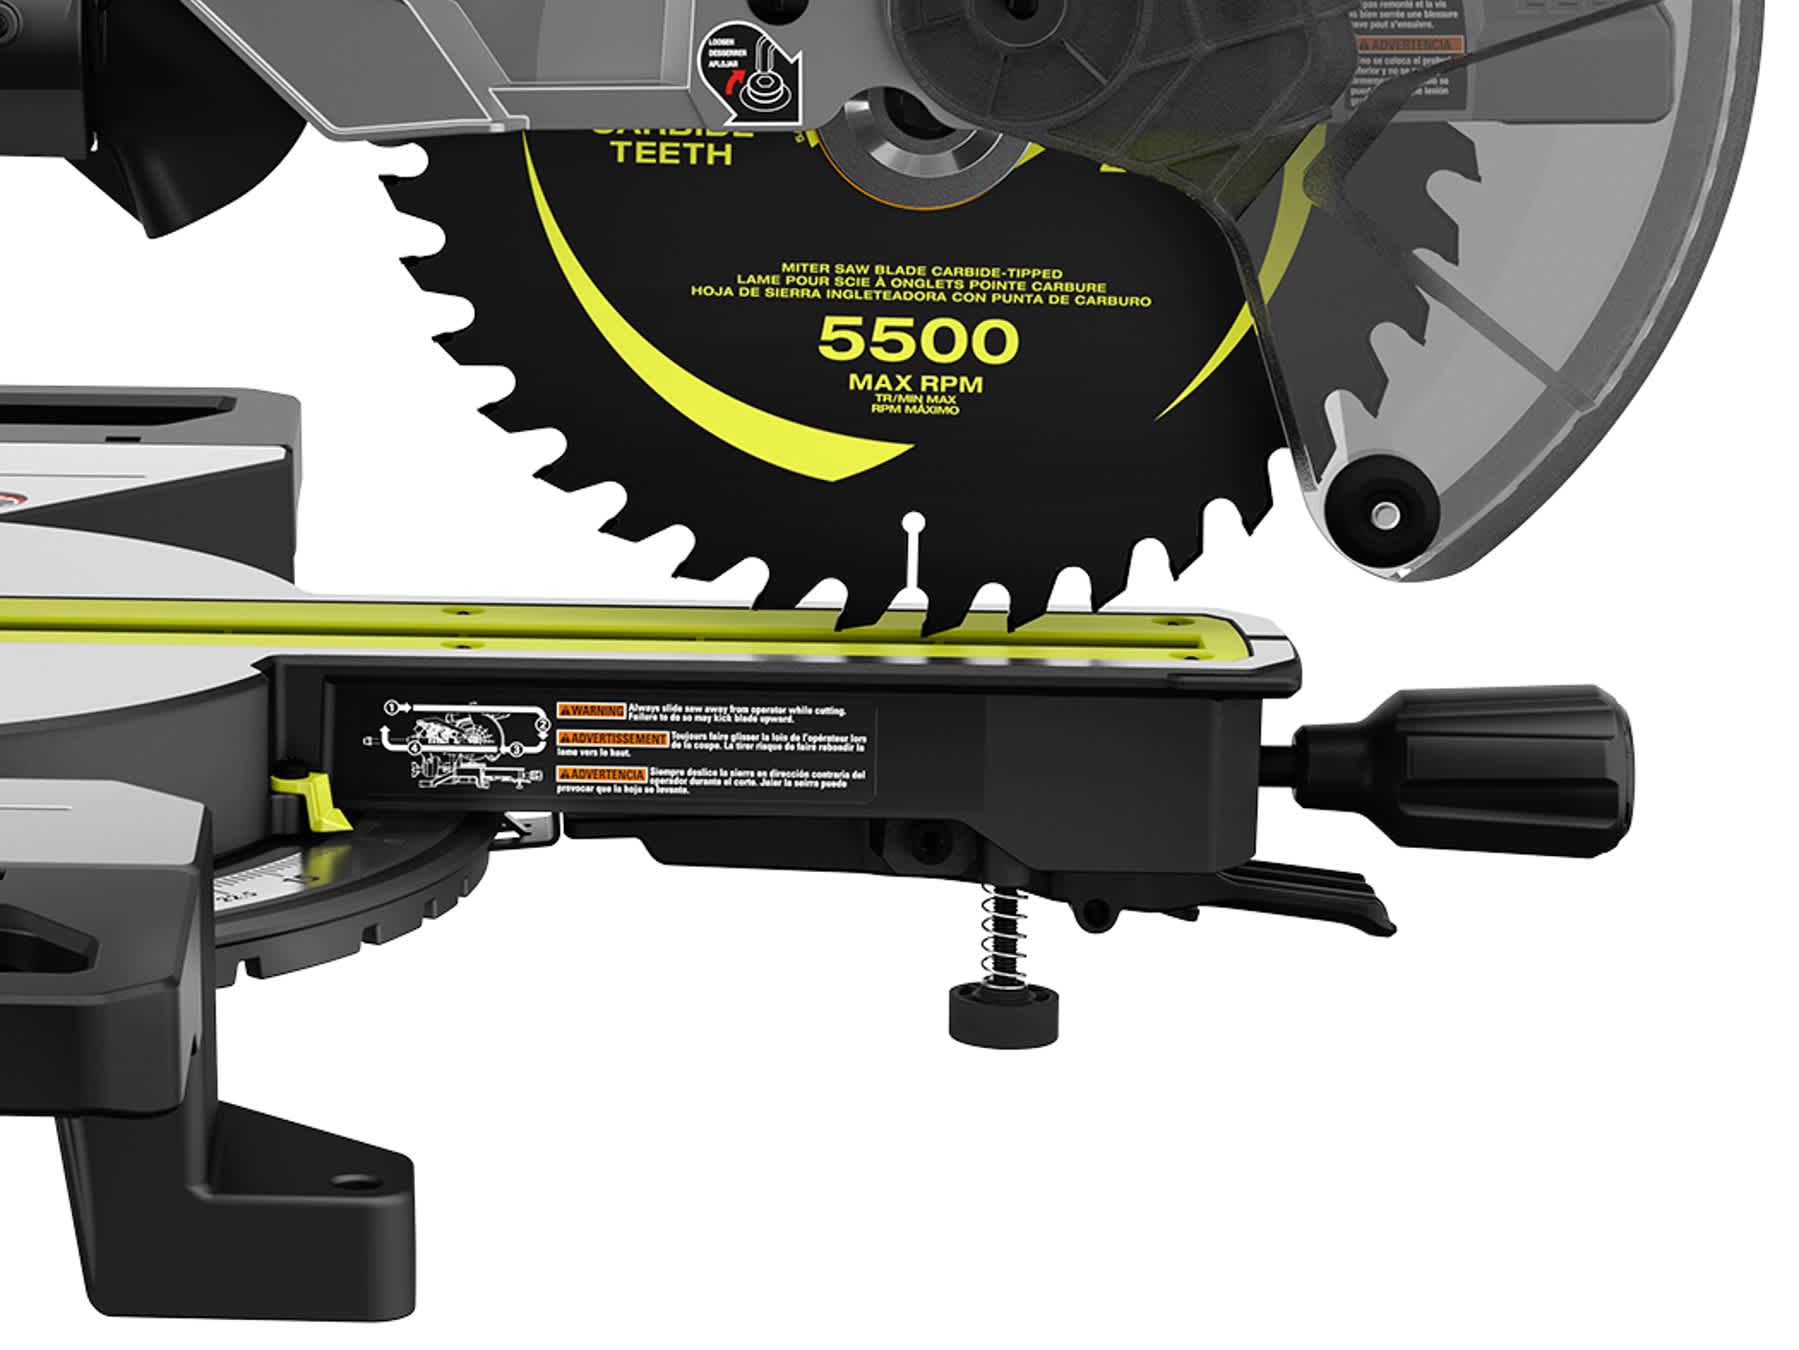 Product Features Image for 18V ONE+ HP BRUSHLESS 10" SLIDING COMPOUND MITER SAW KIT.